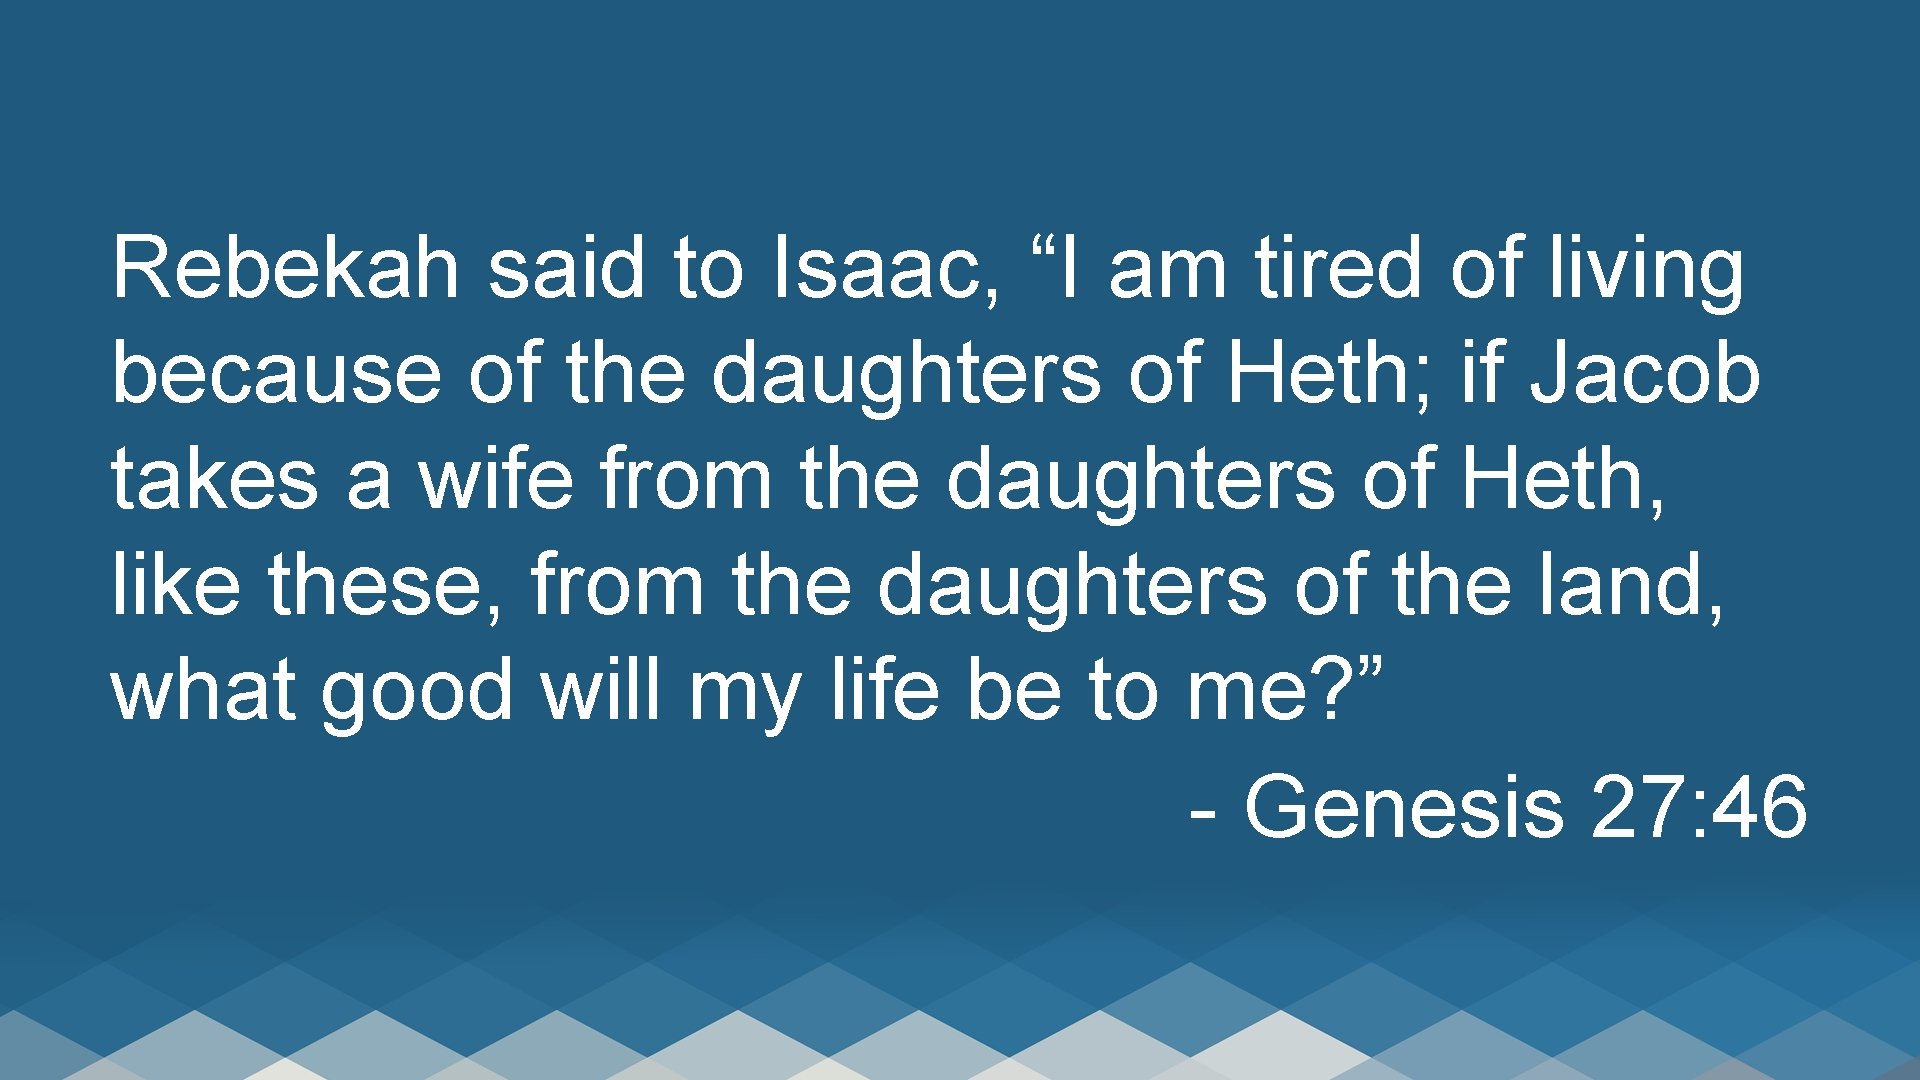 Rebekah said to Isaac, “I am tired of living because of the daughters of